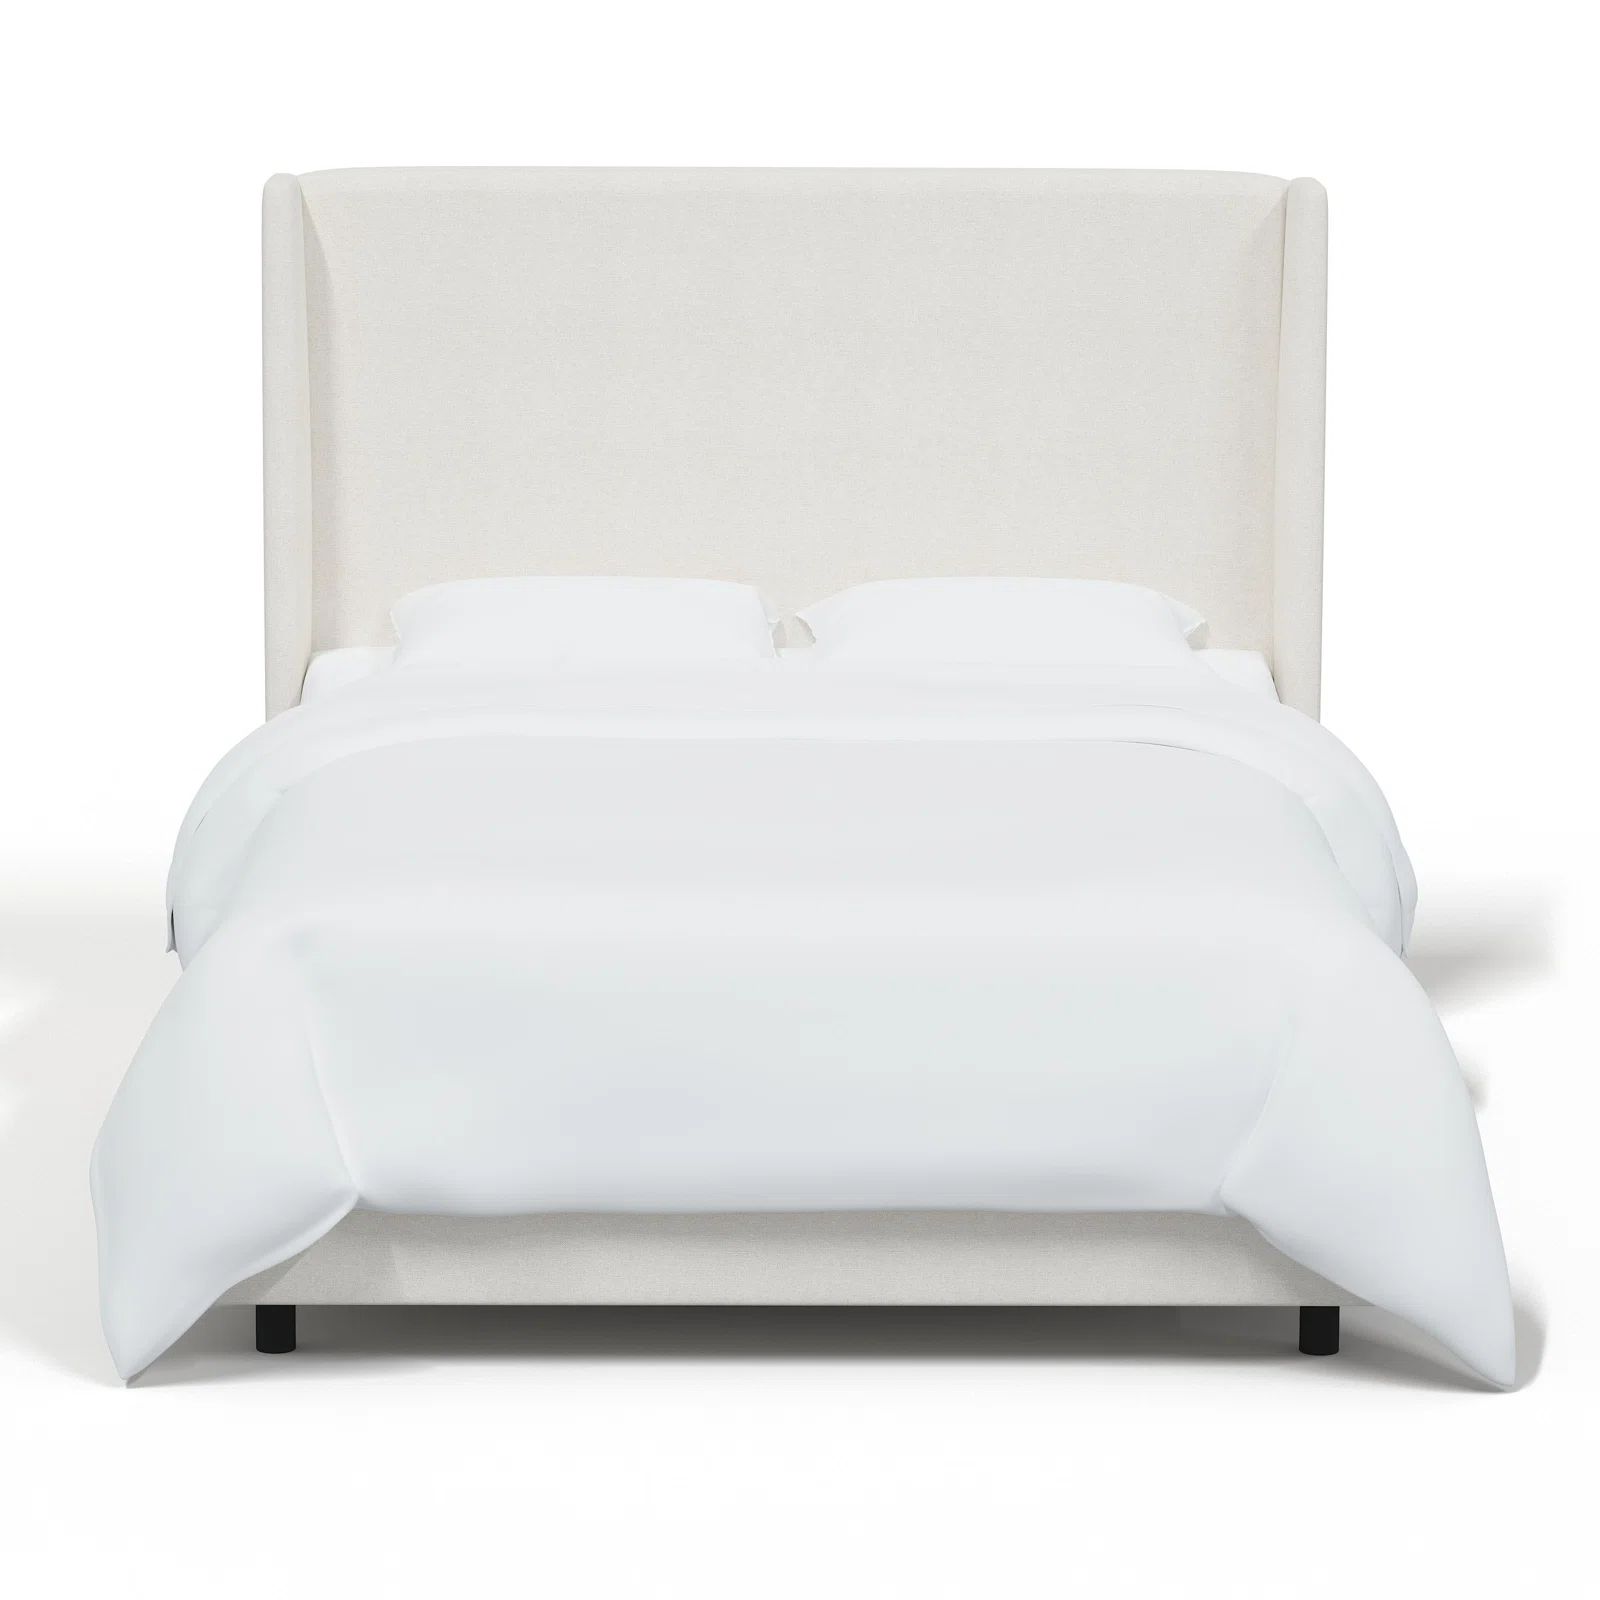 Zuma White Tilly Upholstered Low Profile Standard Bed | Wayfair North America